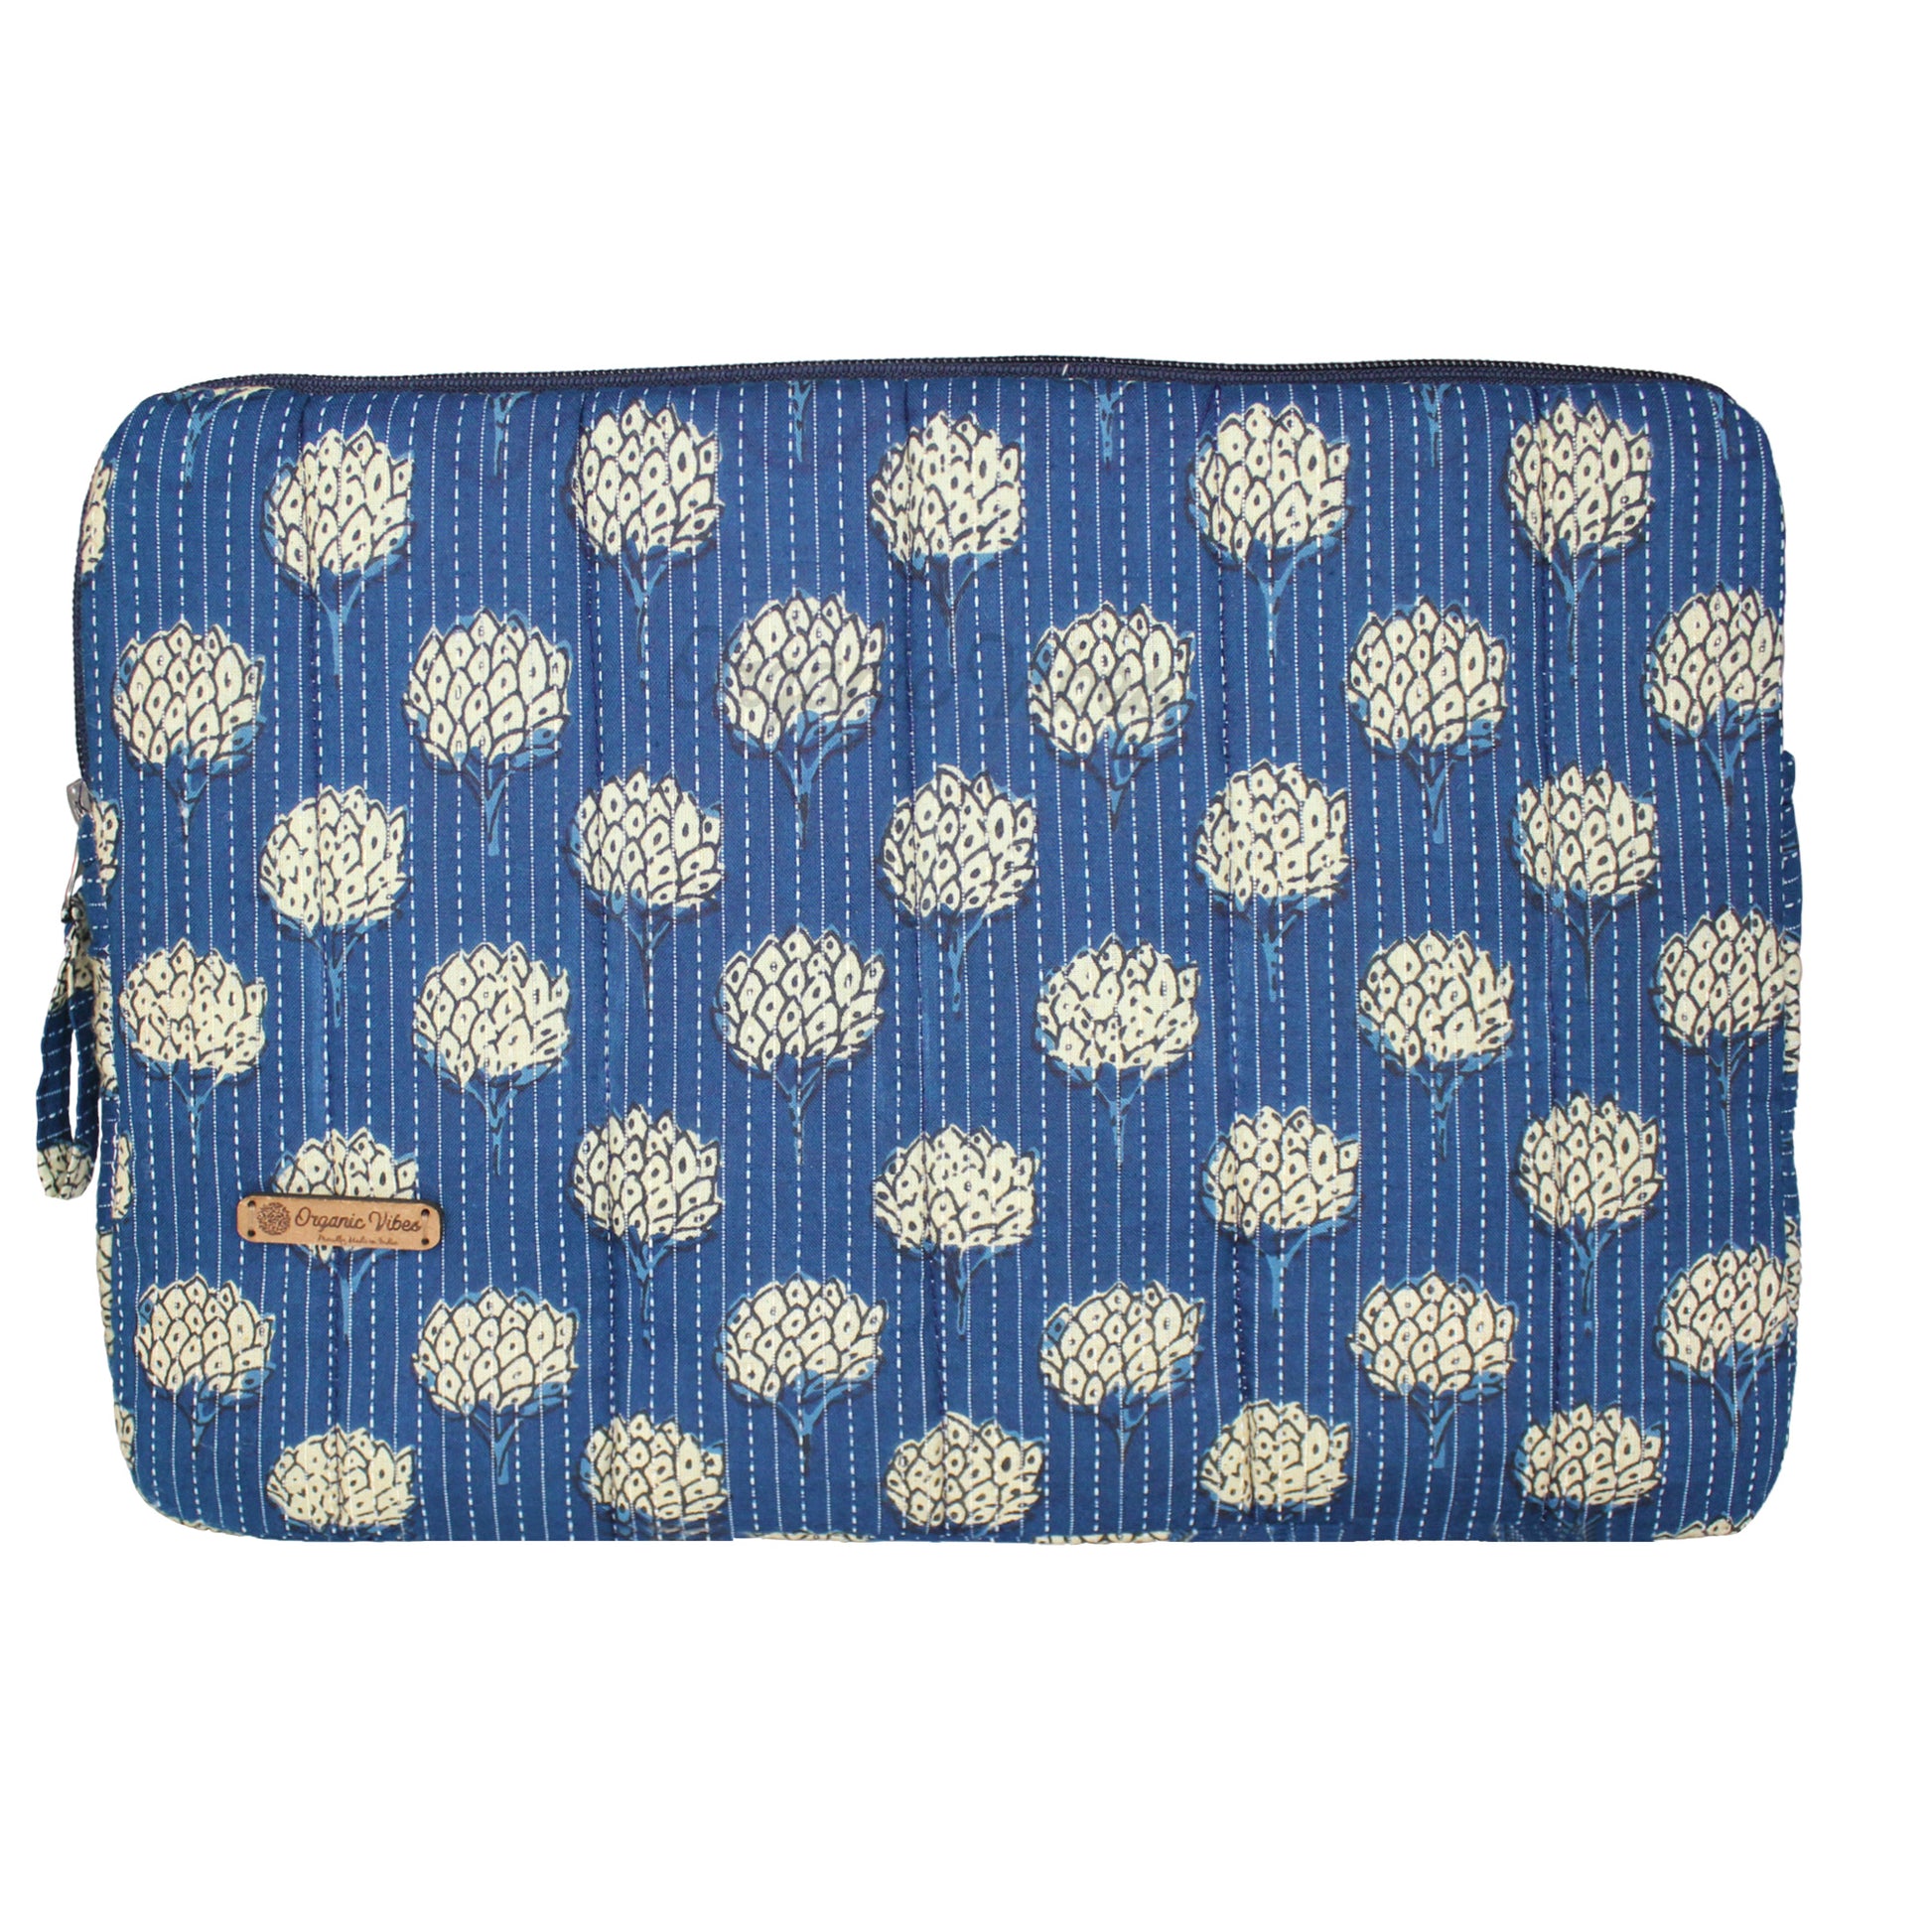 Organic Vibes Hand Block Blue Ikat Floral Printed Laptop Sleeves for 13 Inches Laptop